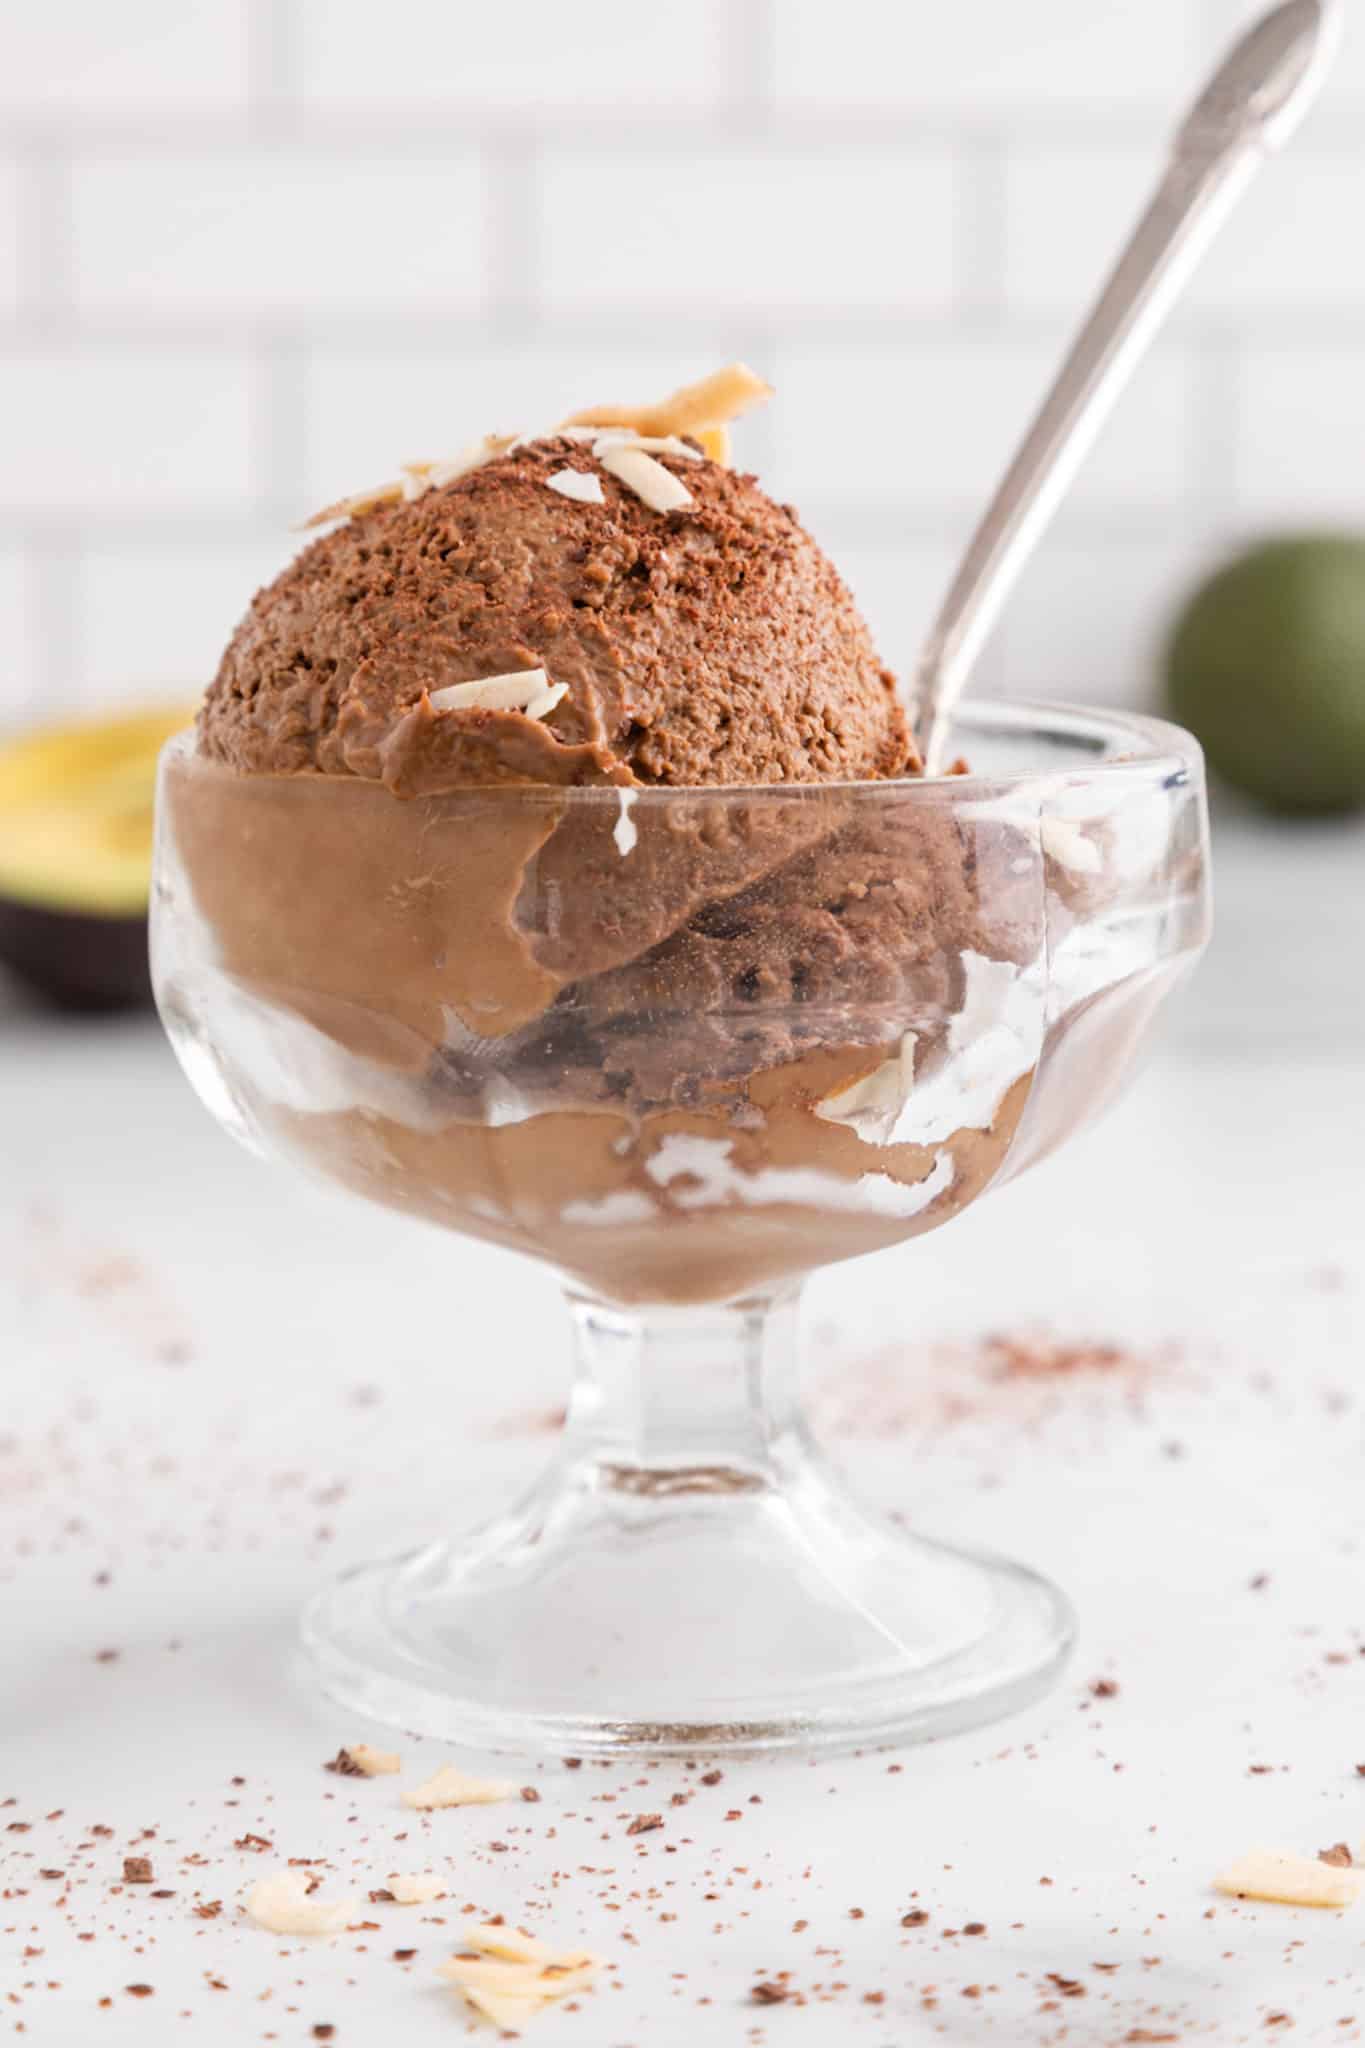 Side view of a glass parfait dish holding a spoon and two scoops of chocolate avocado ice cream.